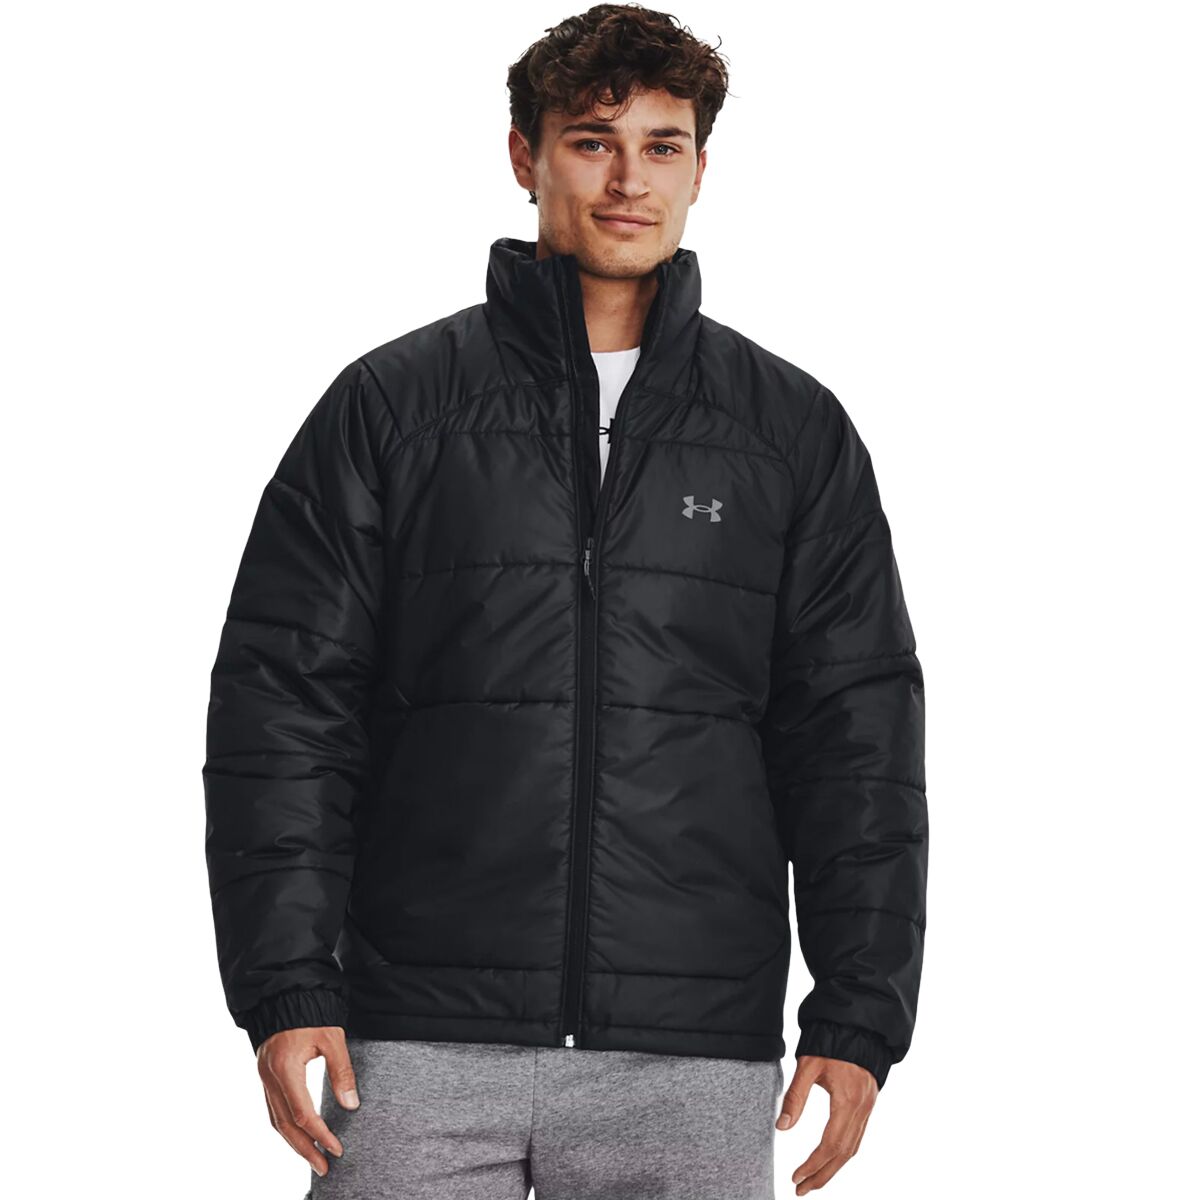 Under Armour Storm Insulated Jacket - Men's